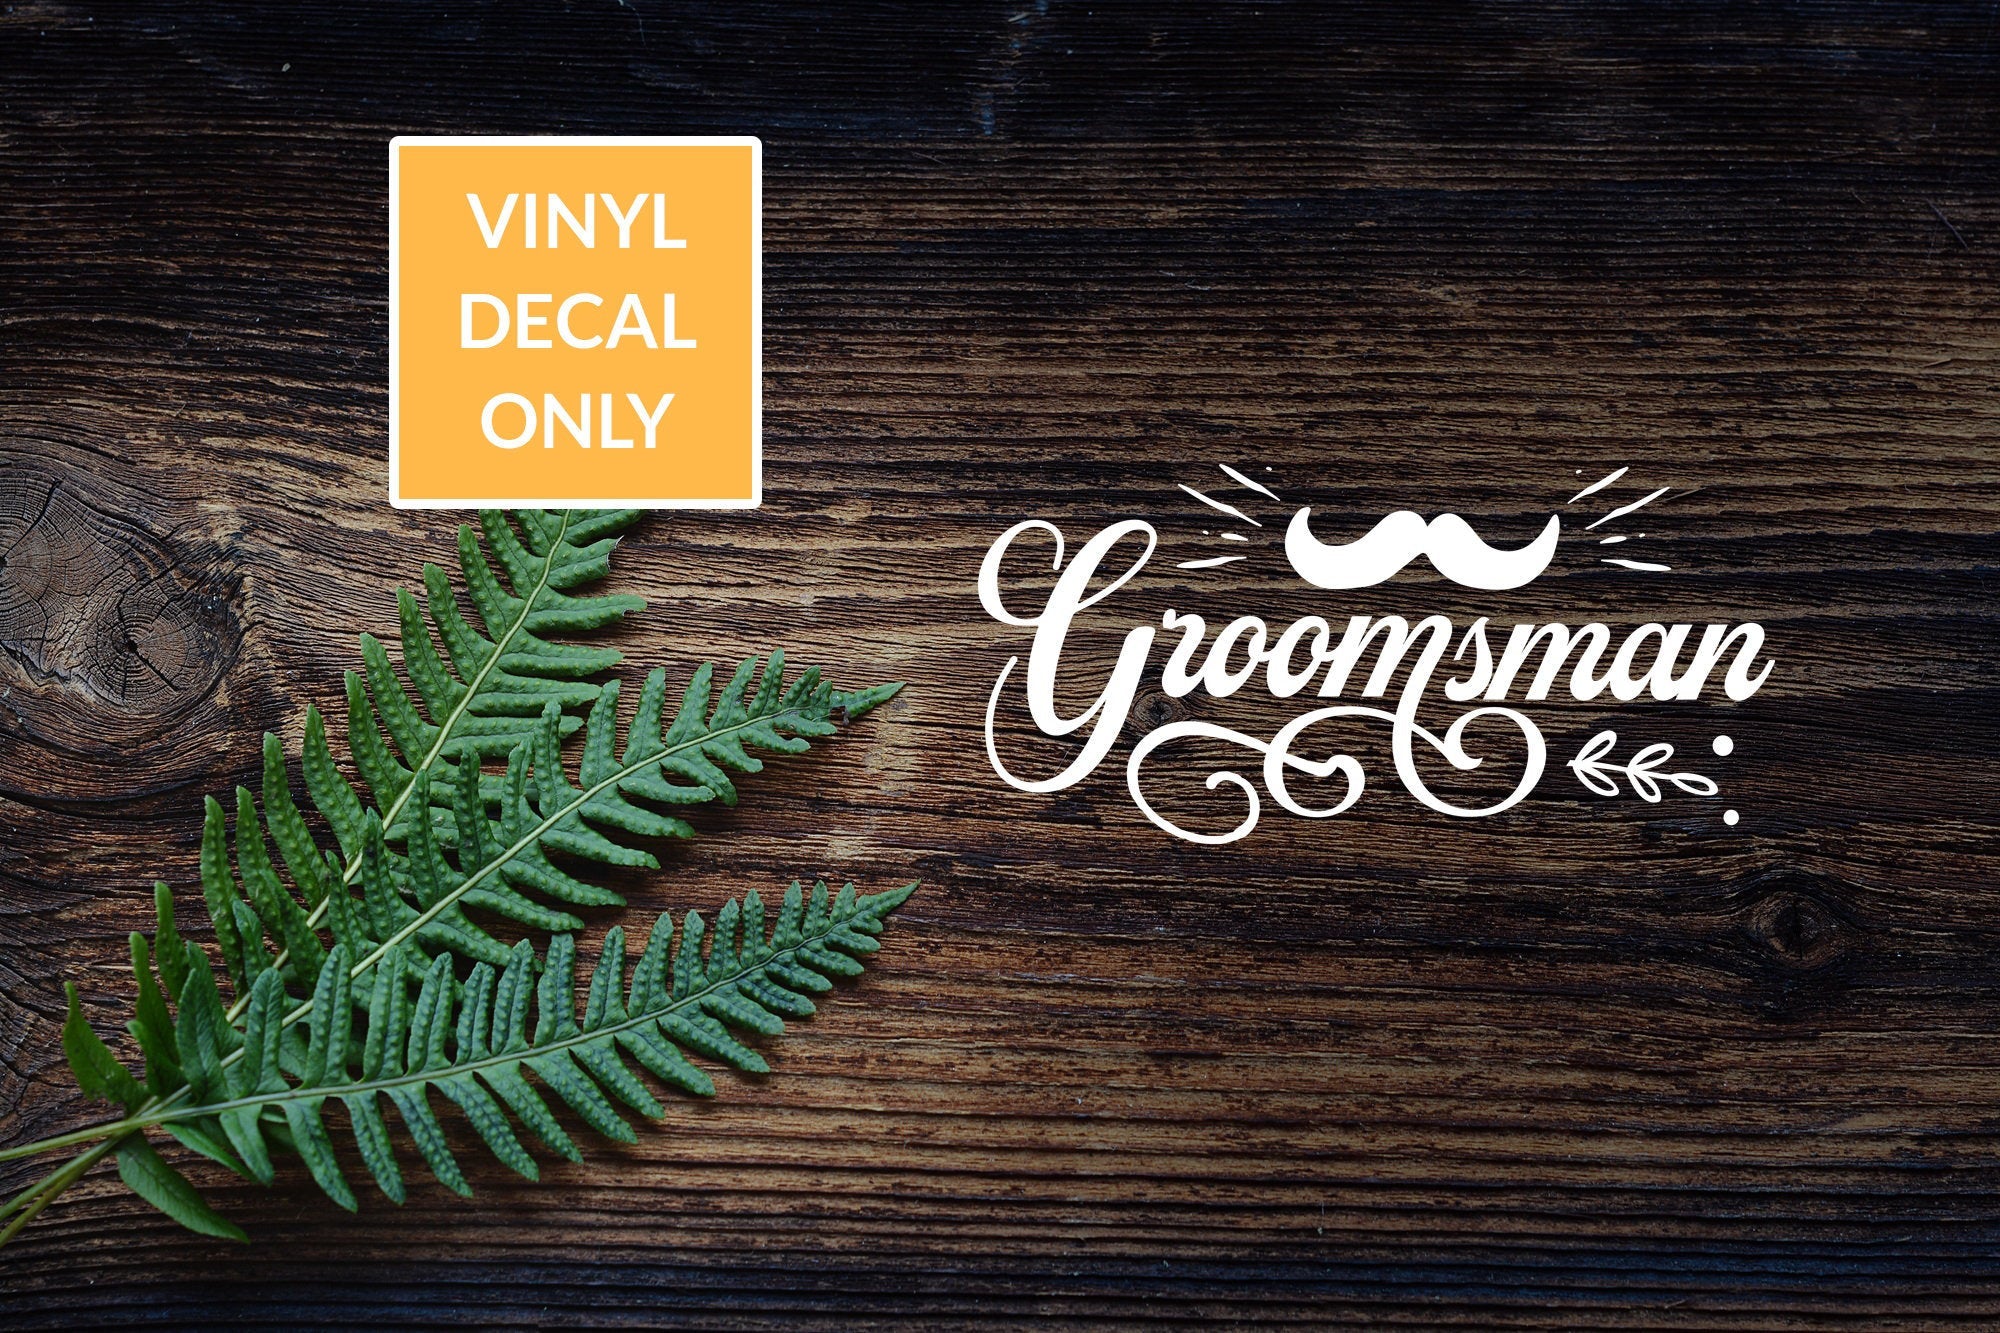 Groomsman decal - Permanent Vinyl Decal for Glass, Metal, Wood Signs, and other Smooth Surfaces